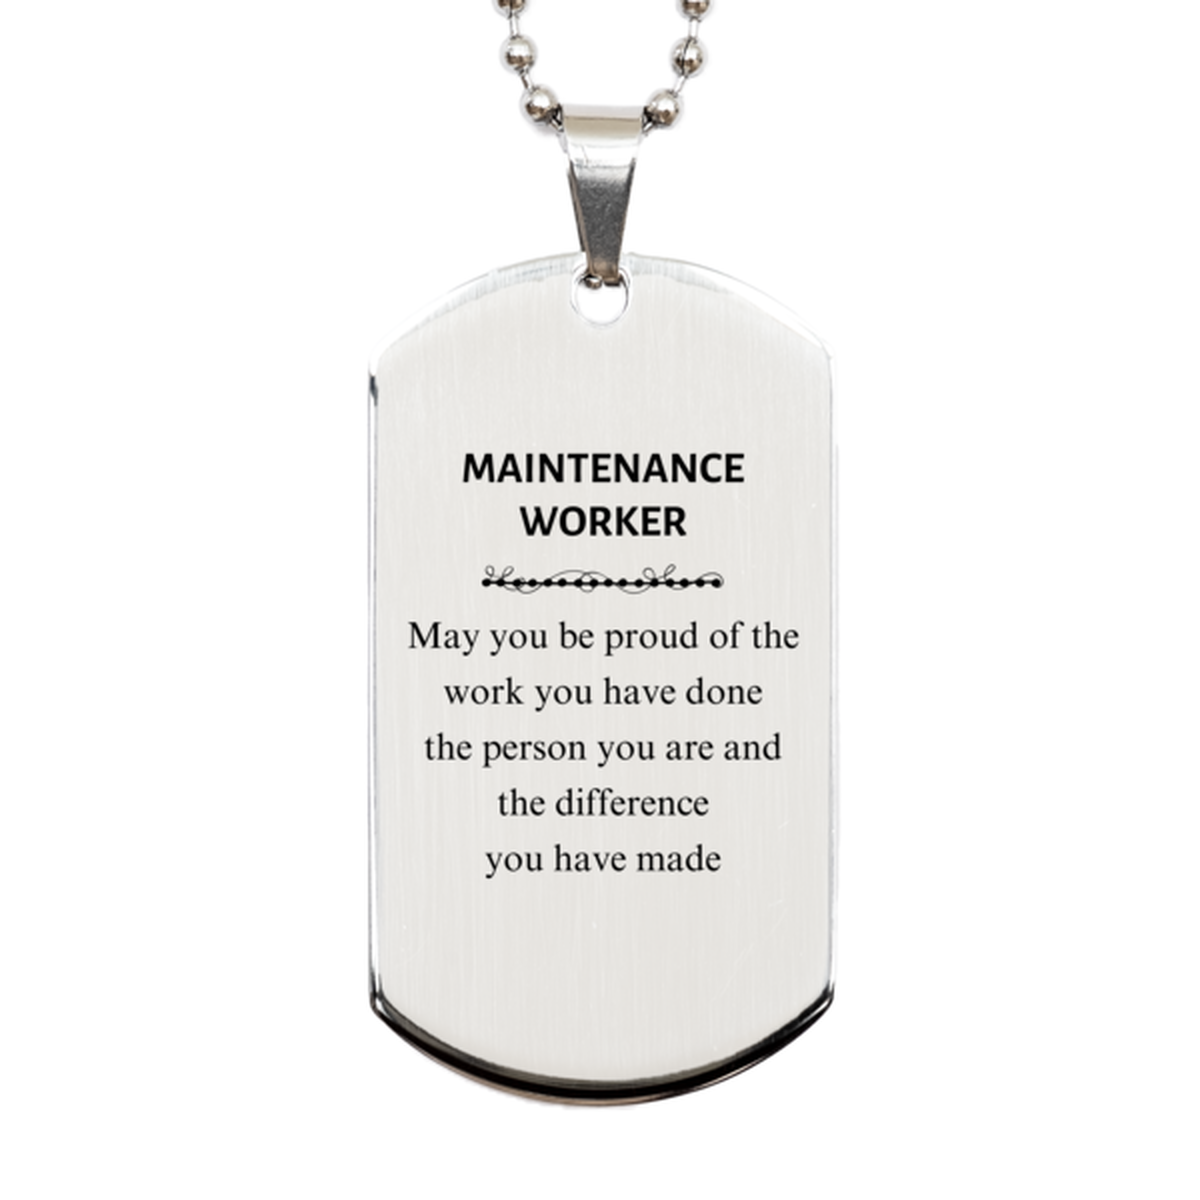 Maintenance Worker May you be proud of the work you have done, Retirement Maintenance Worker Silver Dog Tag for Colleague Appreciation Gifts Amazing for Maintenance Worker